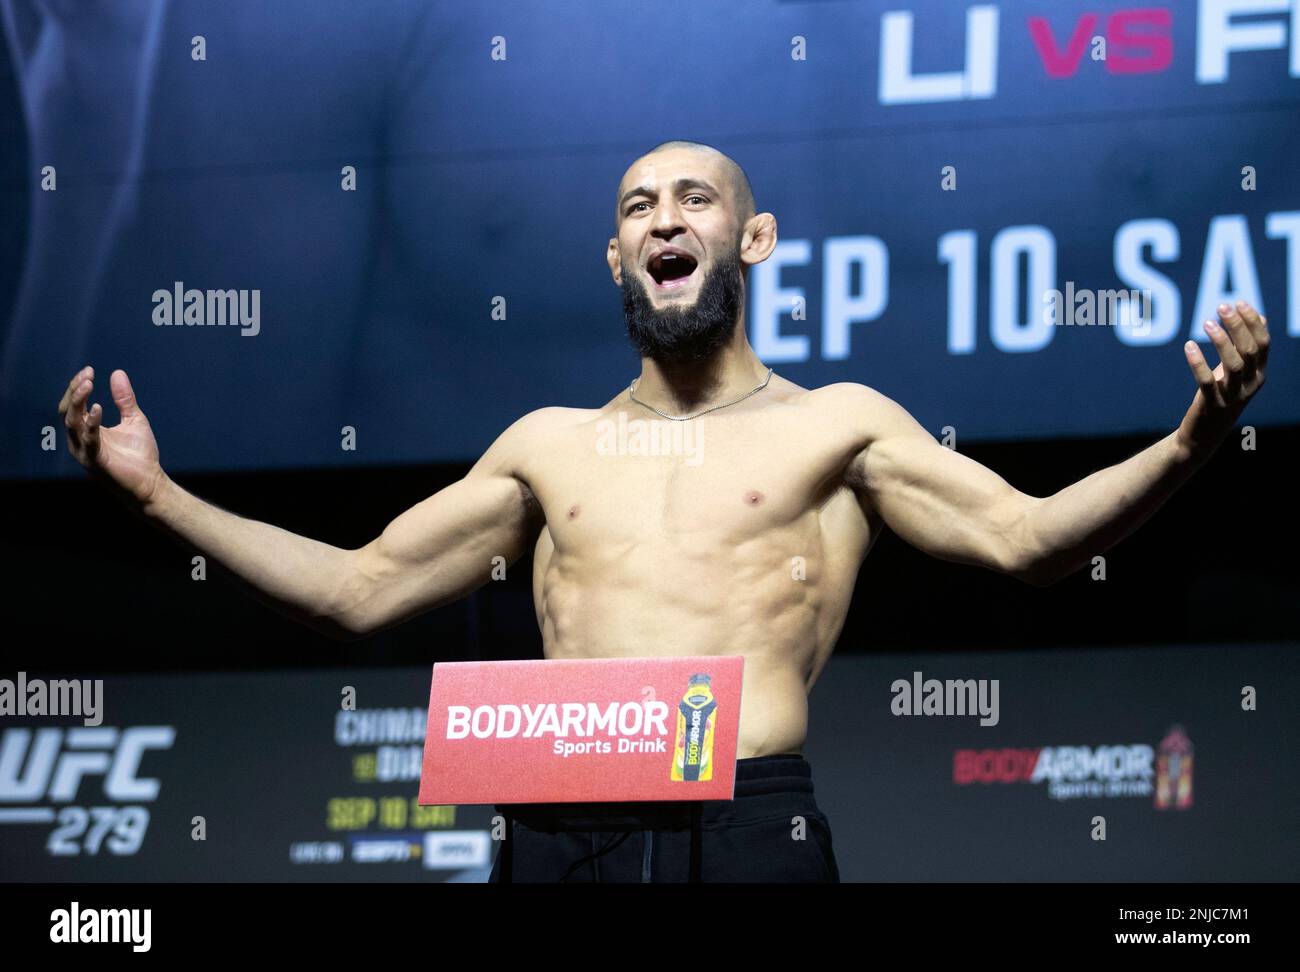 UFC fighter Khamzat Chimaev poses on the scale during a ceremonial weigh-in for the UFC 279 mixed martial arts event Friday, Sept